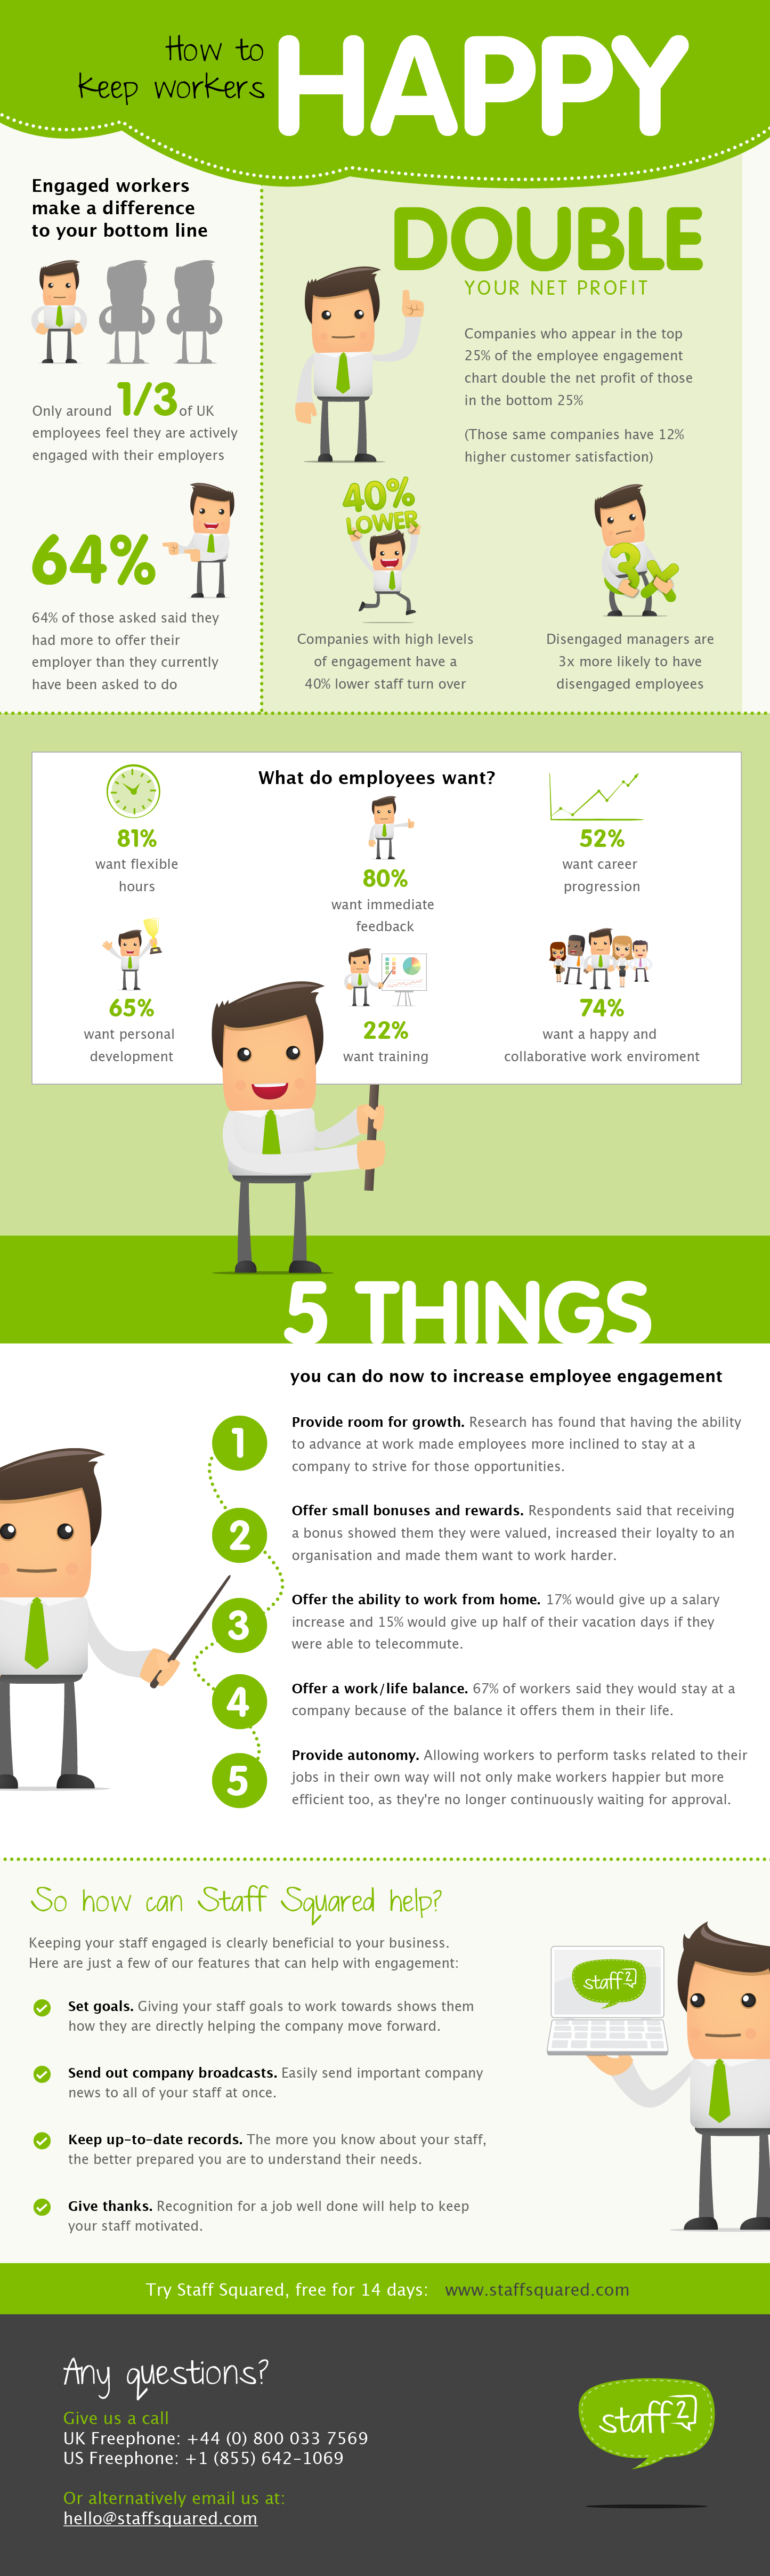 how to keep employees happy